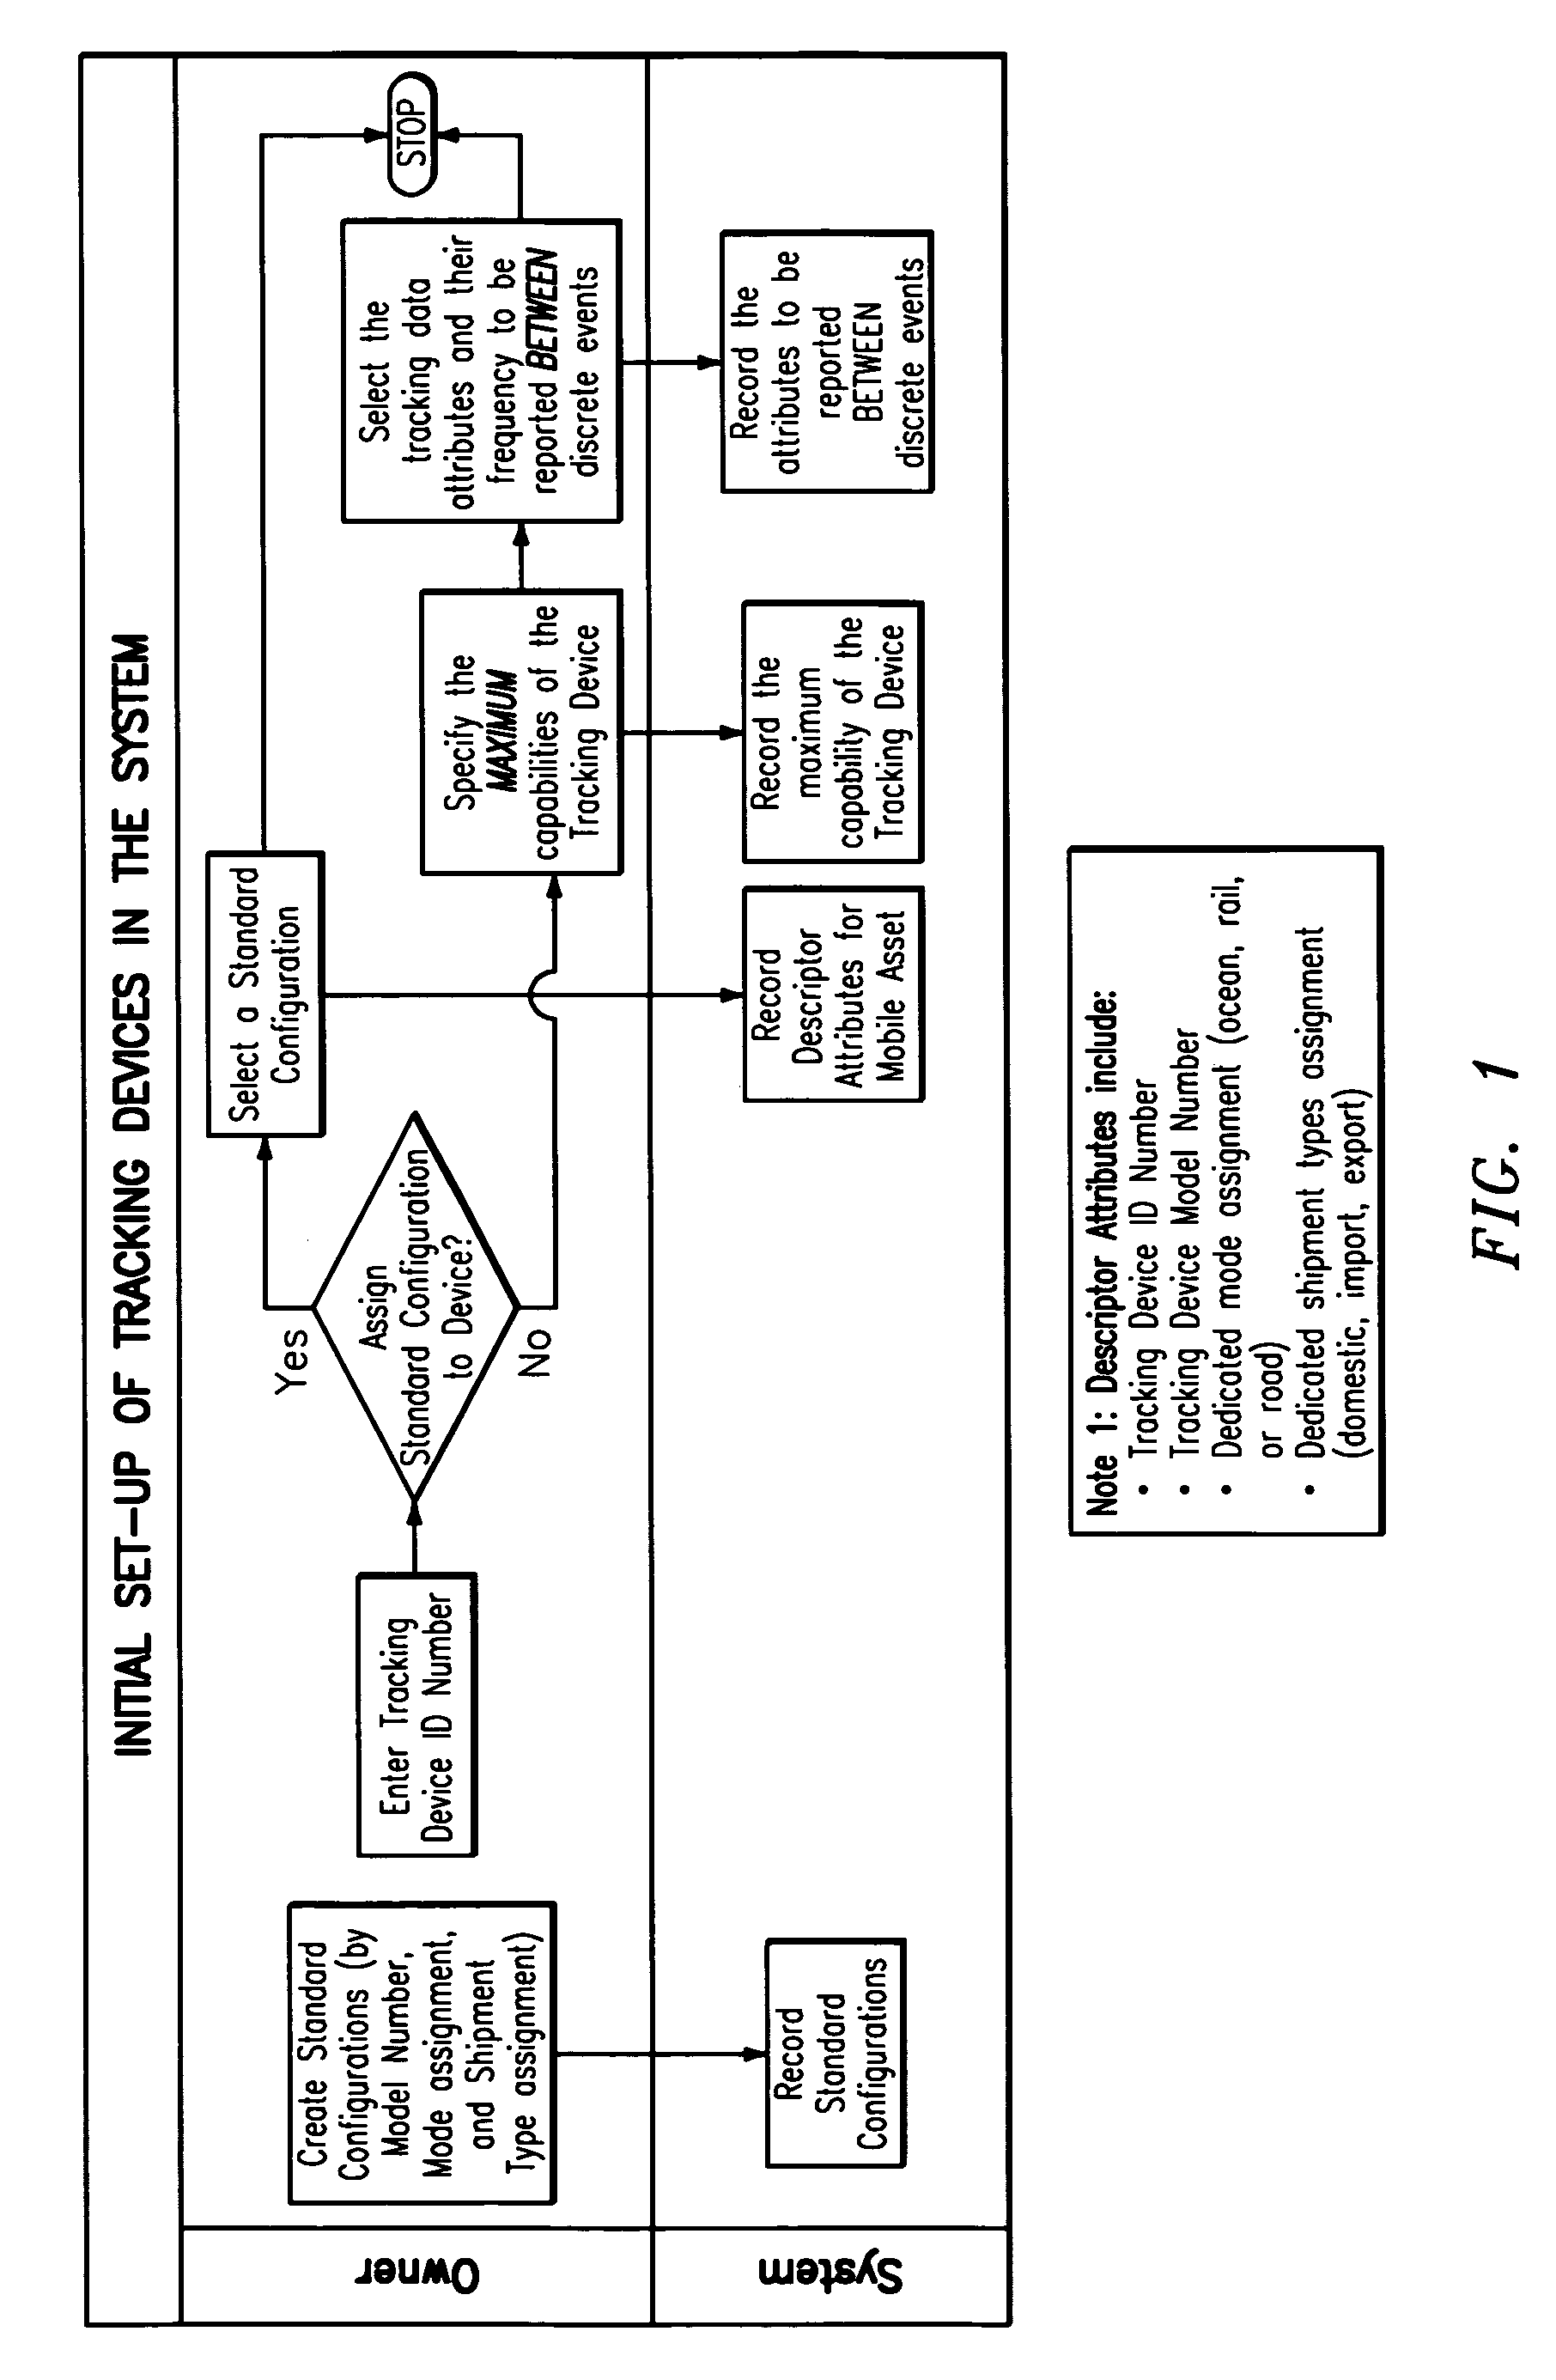 System and method for effectuating the acquisition and distribution of tracking data on mobile assets, including shipment containers used in freight transportation